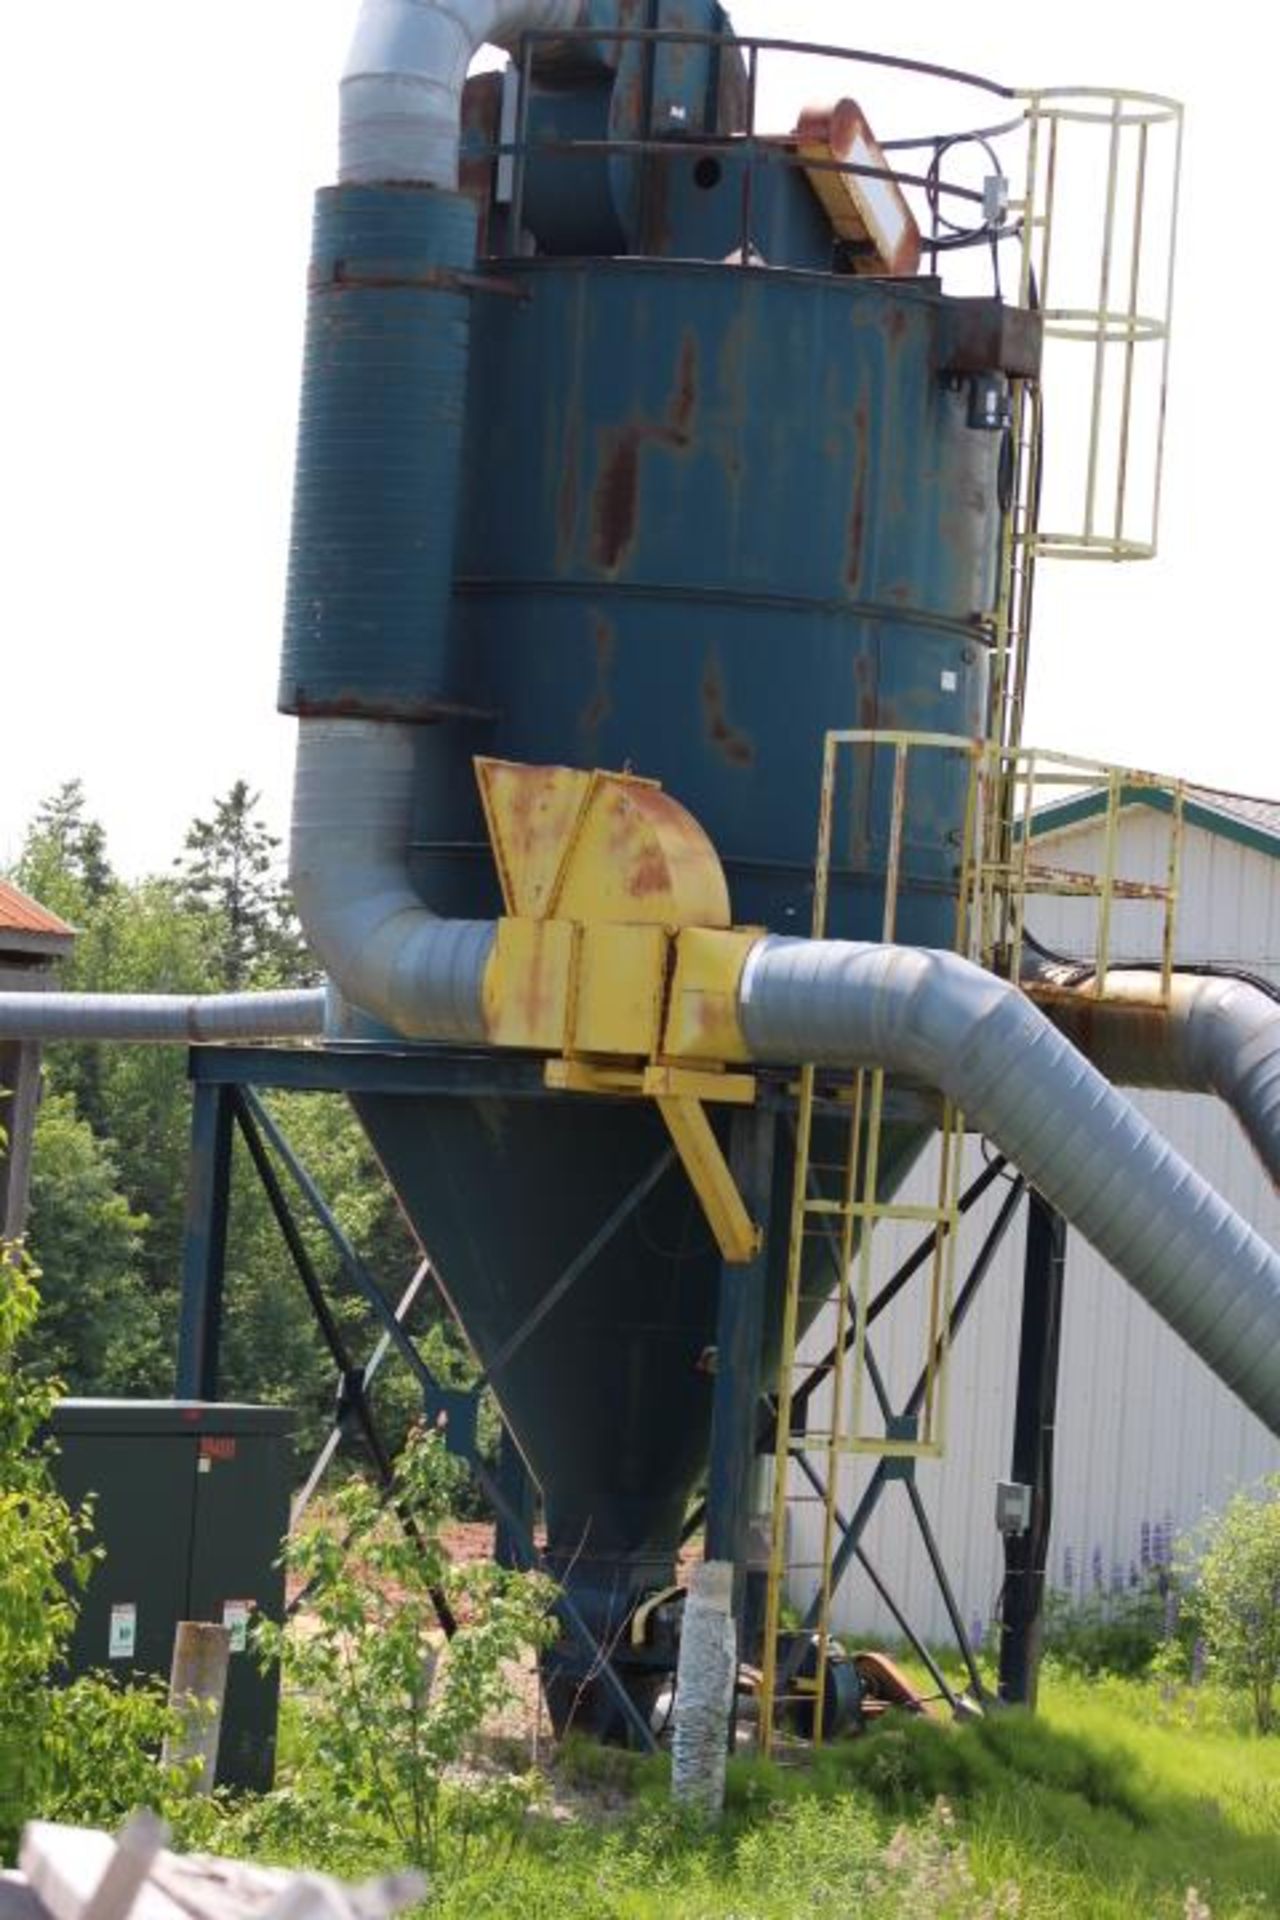 SPEC AIR DUST BLOWER SYSTEM CONSISTING OF EBMF-10, R28RD, EB-24 OUTSIDE SILO - - Image 7 of 7